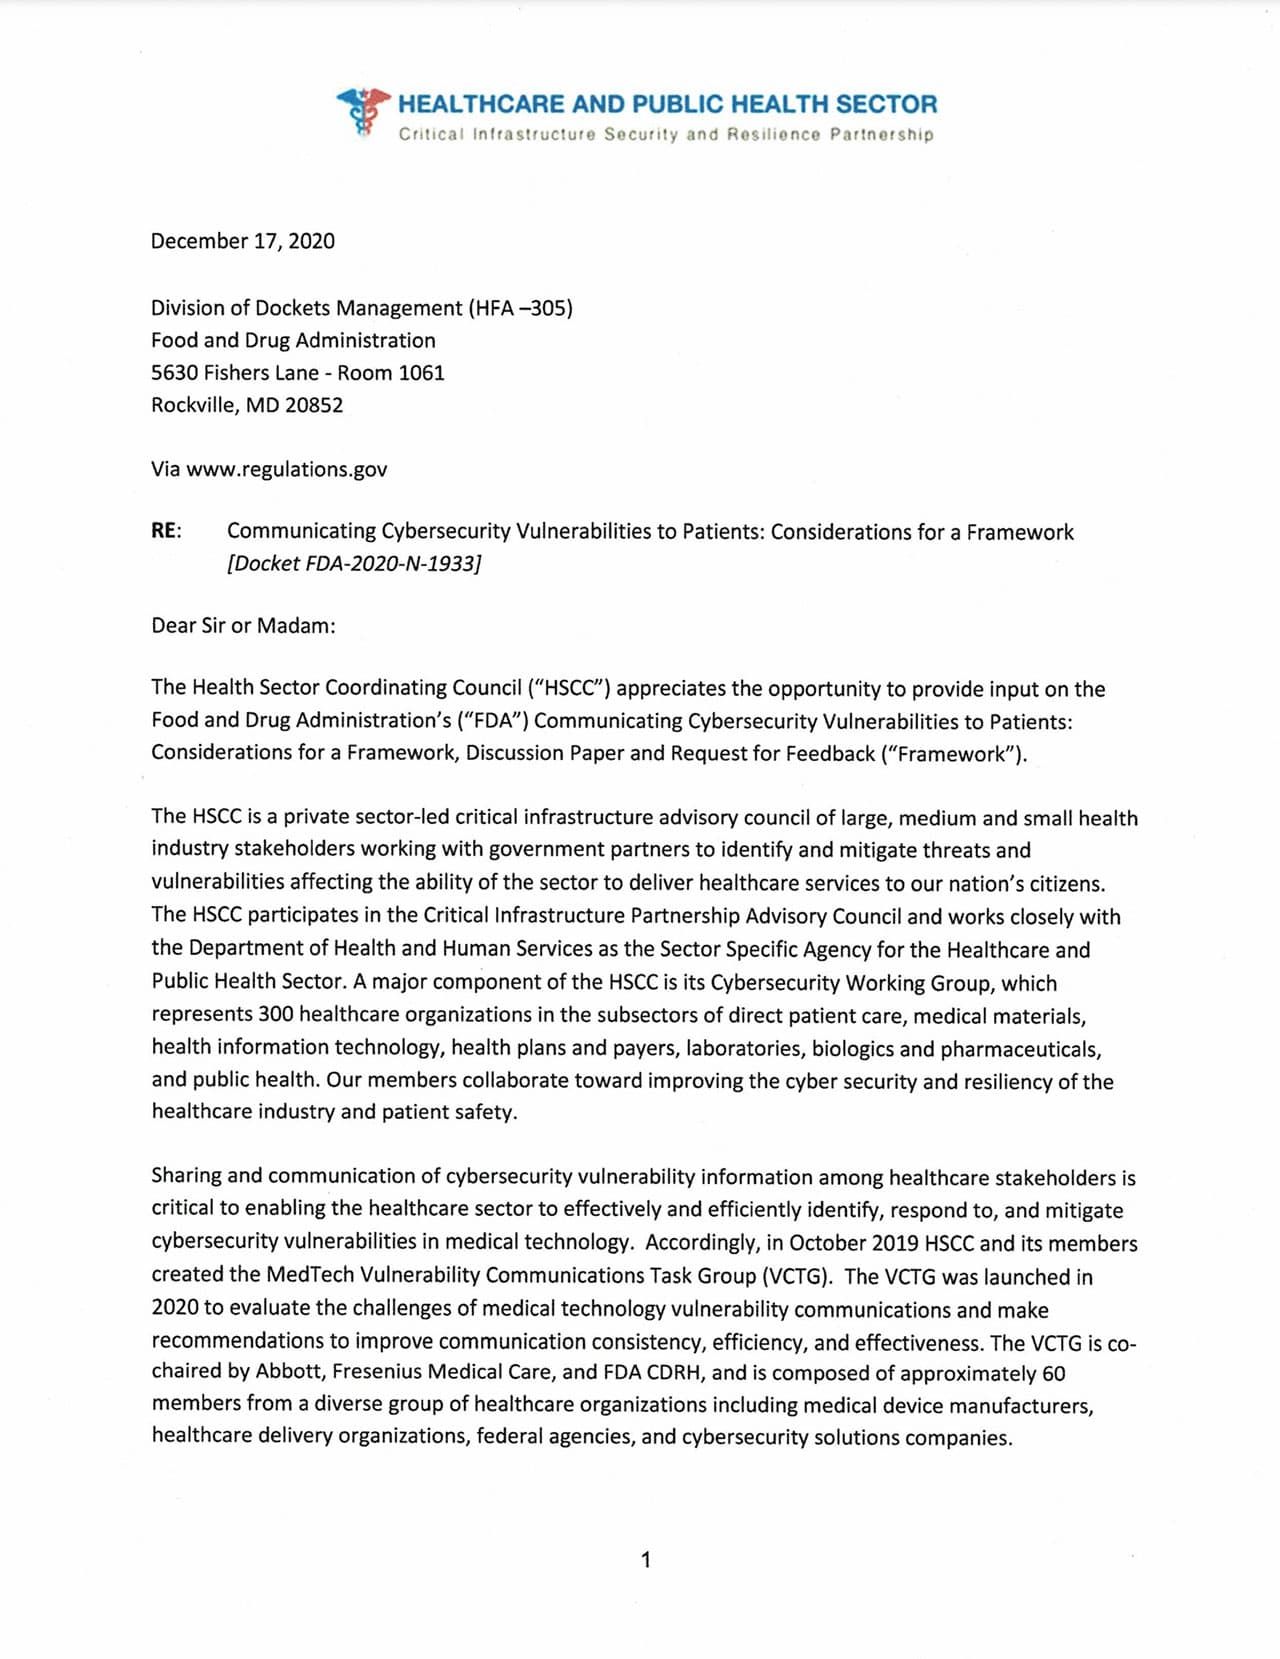 HSCC Comment On FDA Cybersecurity Vulnerability Communications Framework